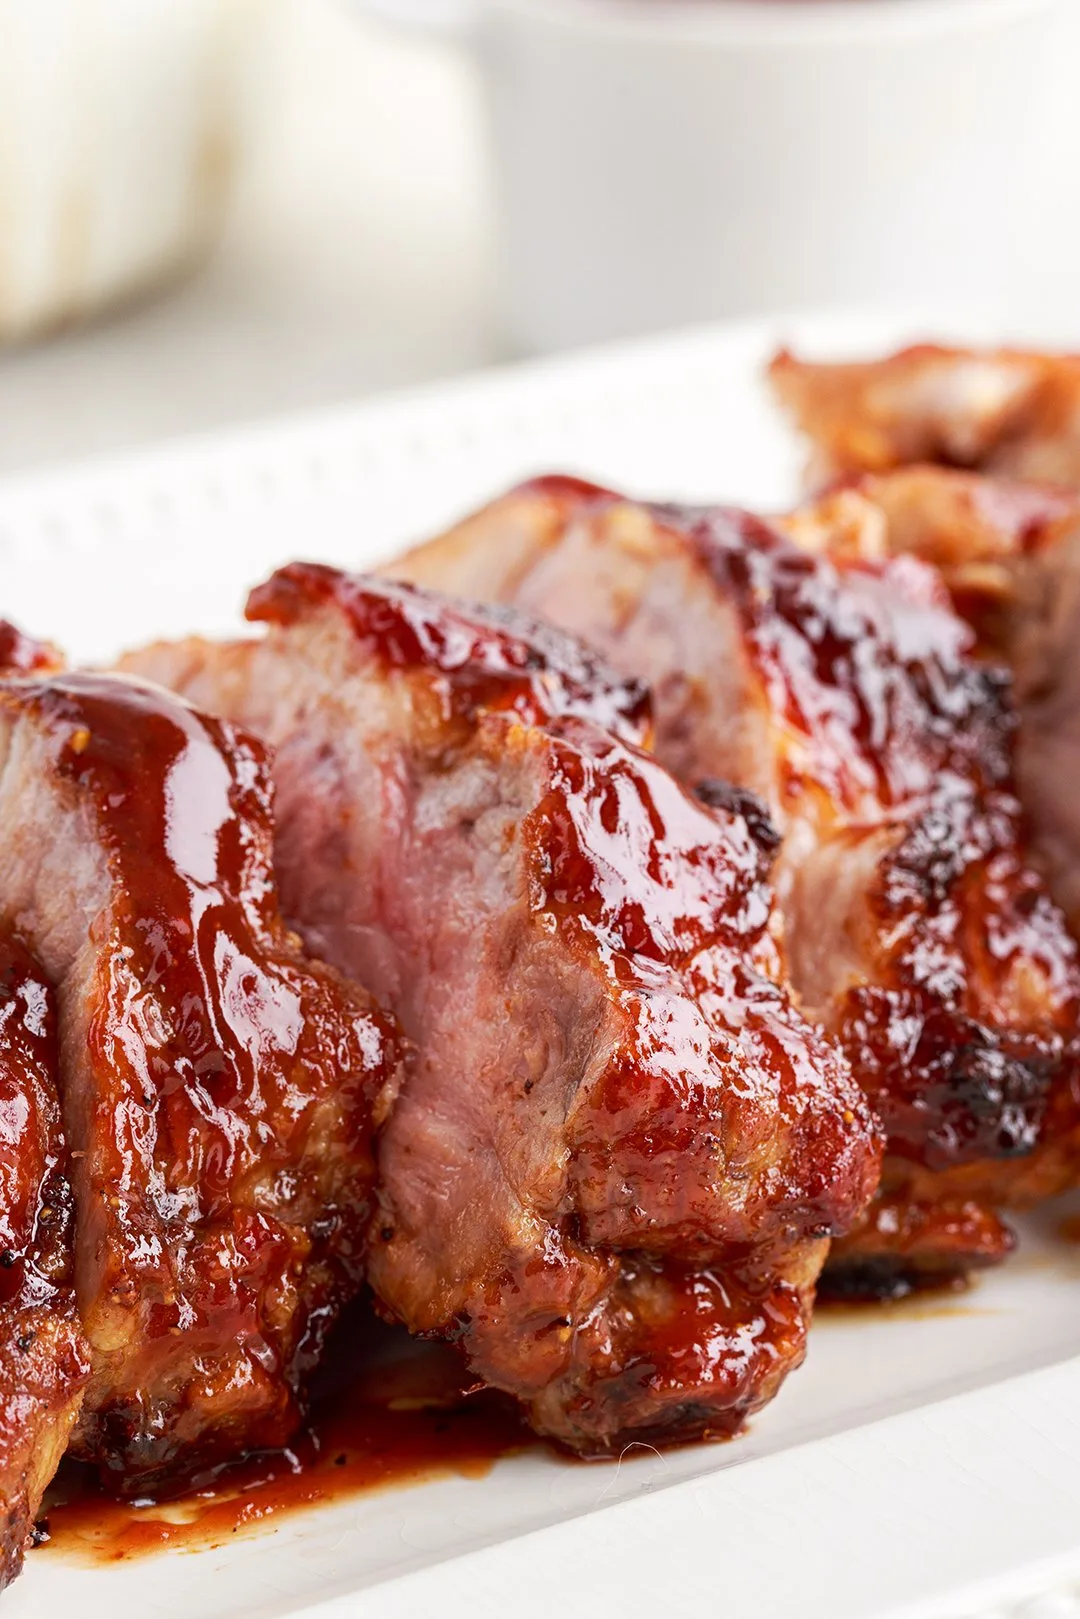 side view of barbecued ribs on a white plate